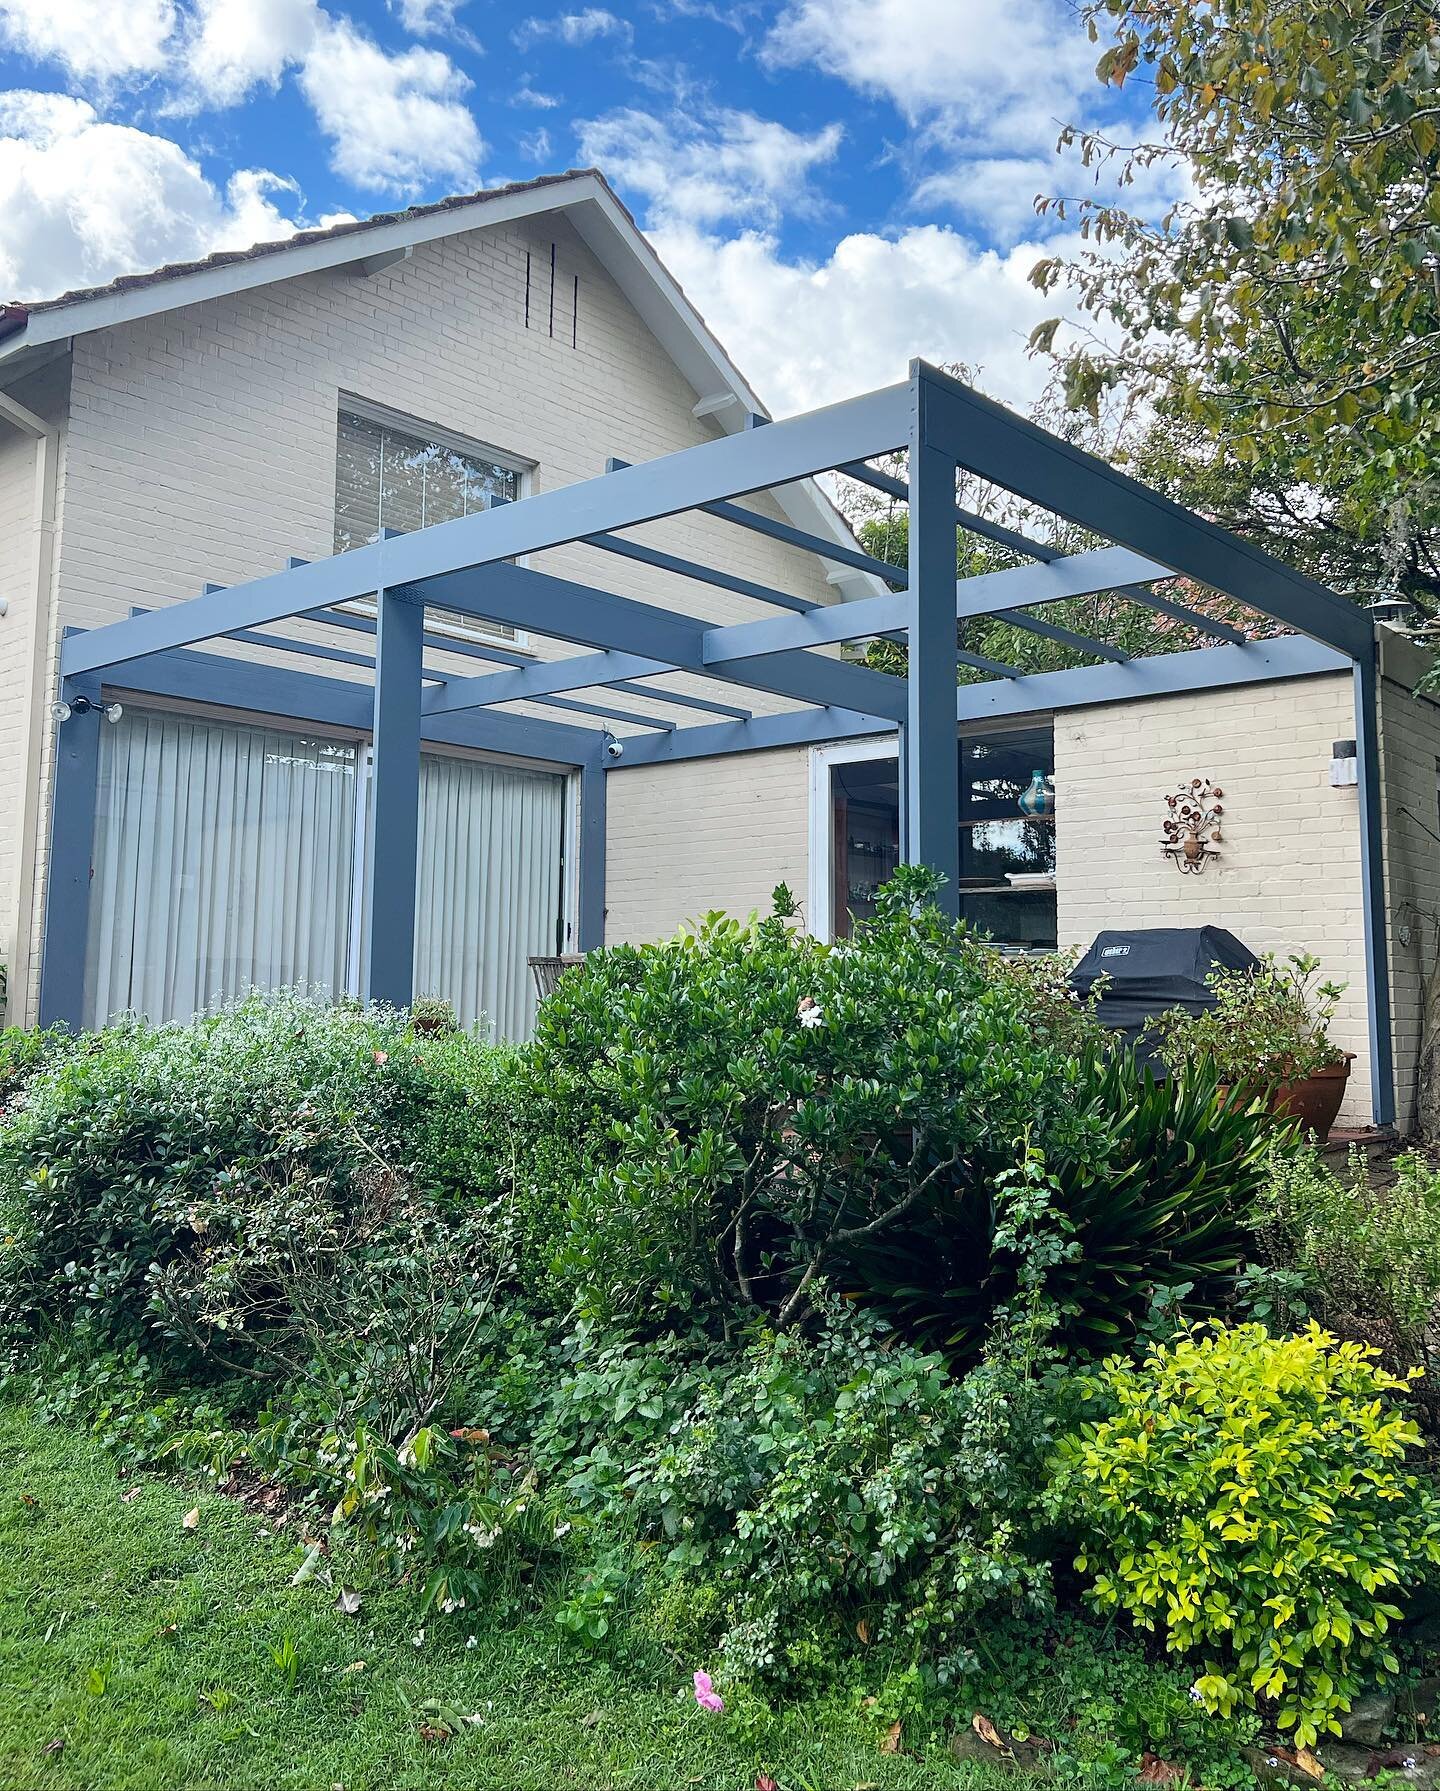 One of our recently completed projects in Turramurra, Sydney. &thinsp;
&thinsp;
Our clients existing pergola had severe termite damage, so we demolished and replaced with a new pergola. All demolition, framing and painting completed by @luxcarpentryc